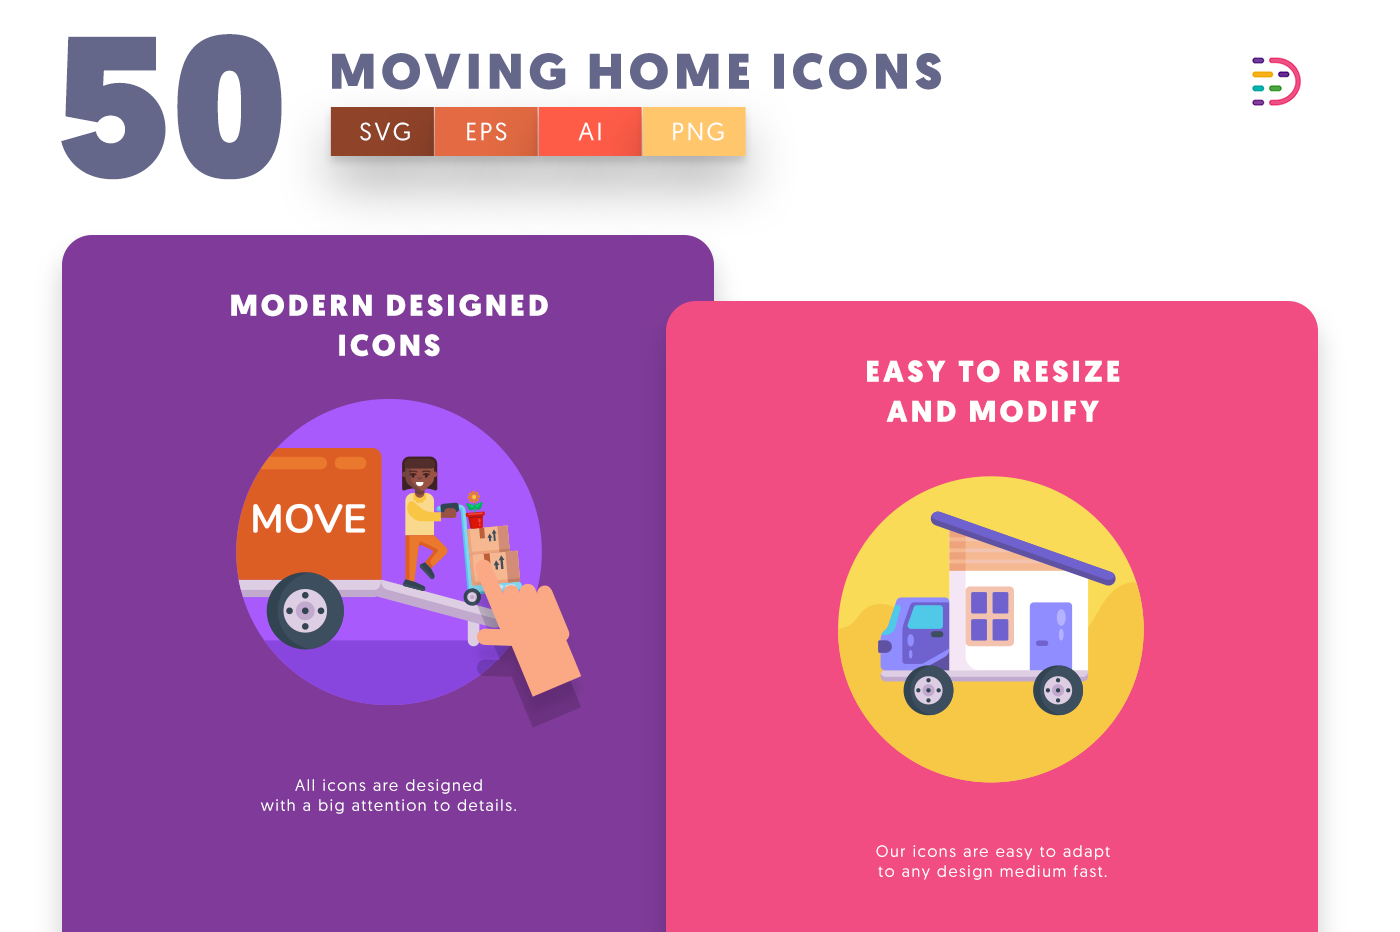 Moving Home icons